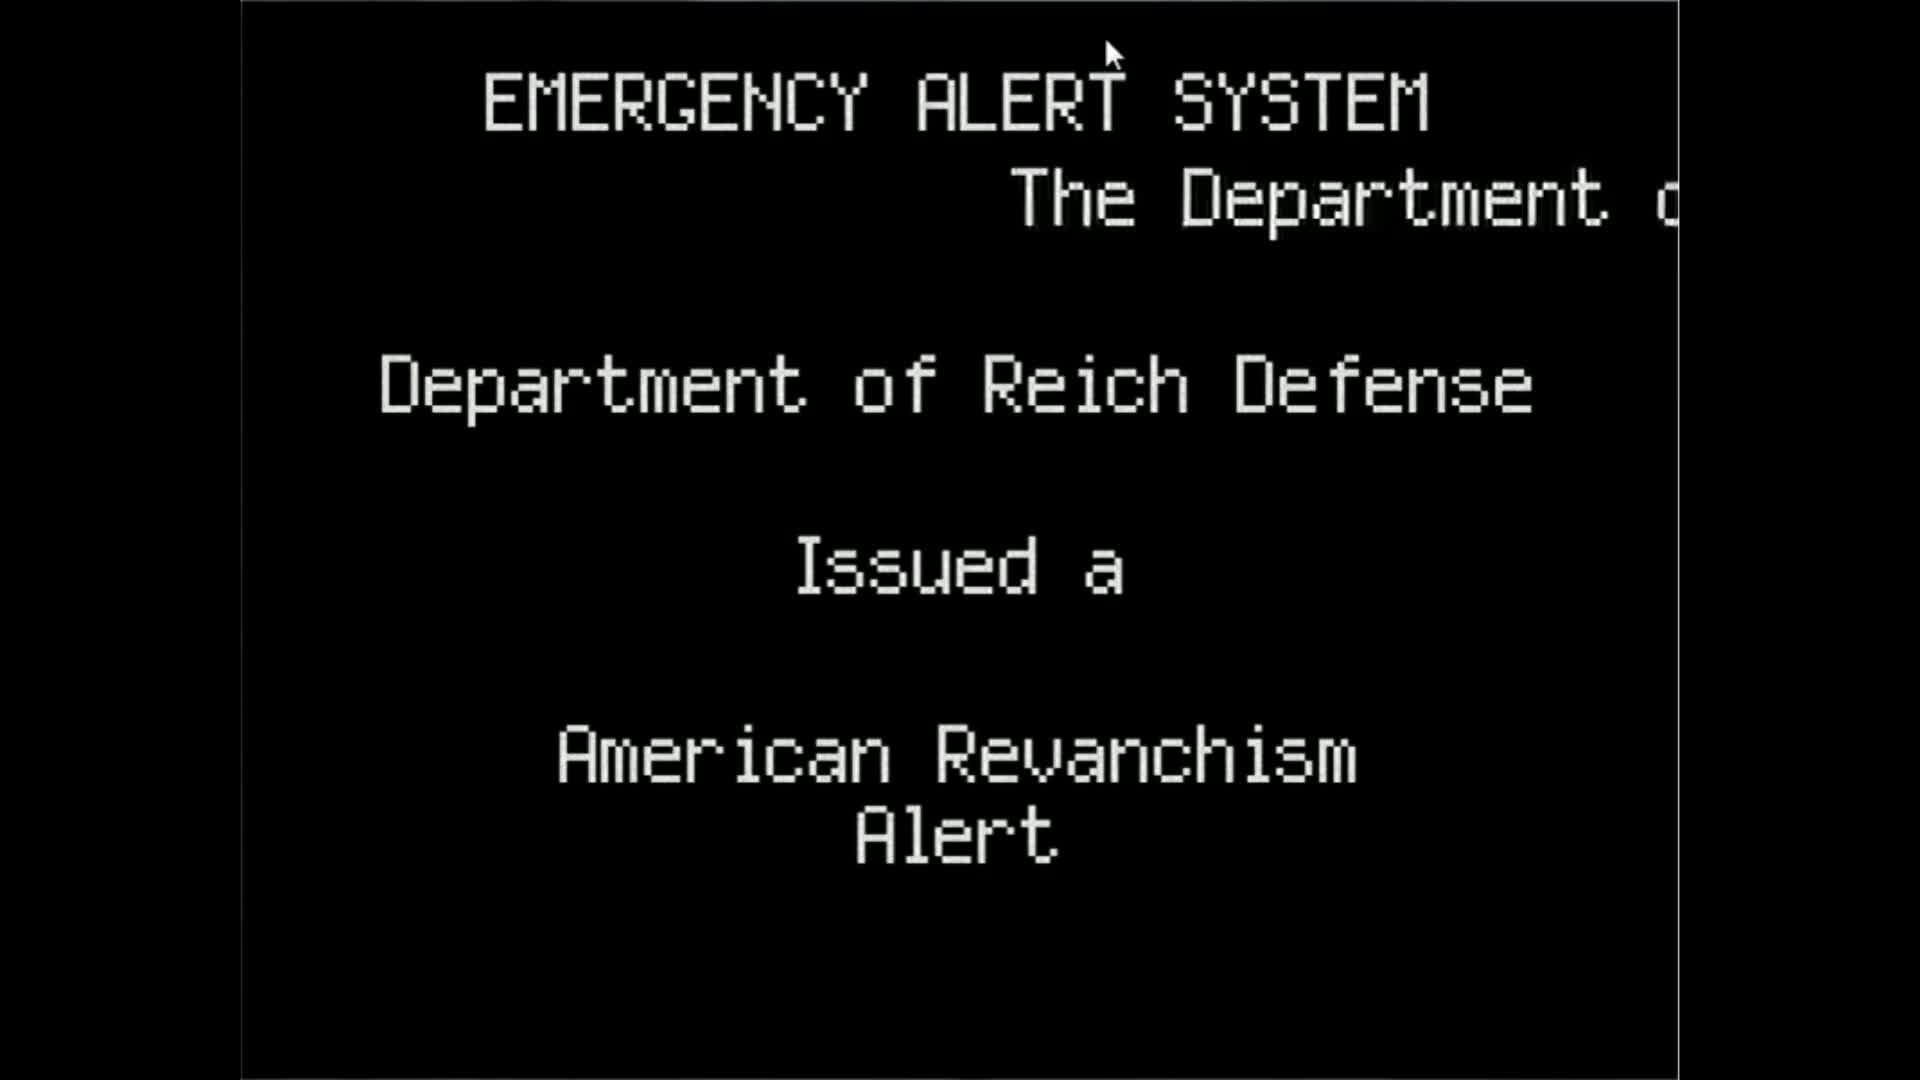 The Emergency Alert System of the American Reich video in the High Castle mod for Victoria 2: Heart of Darkness